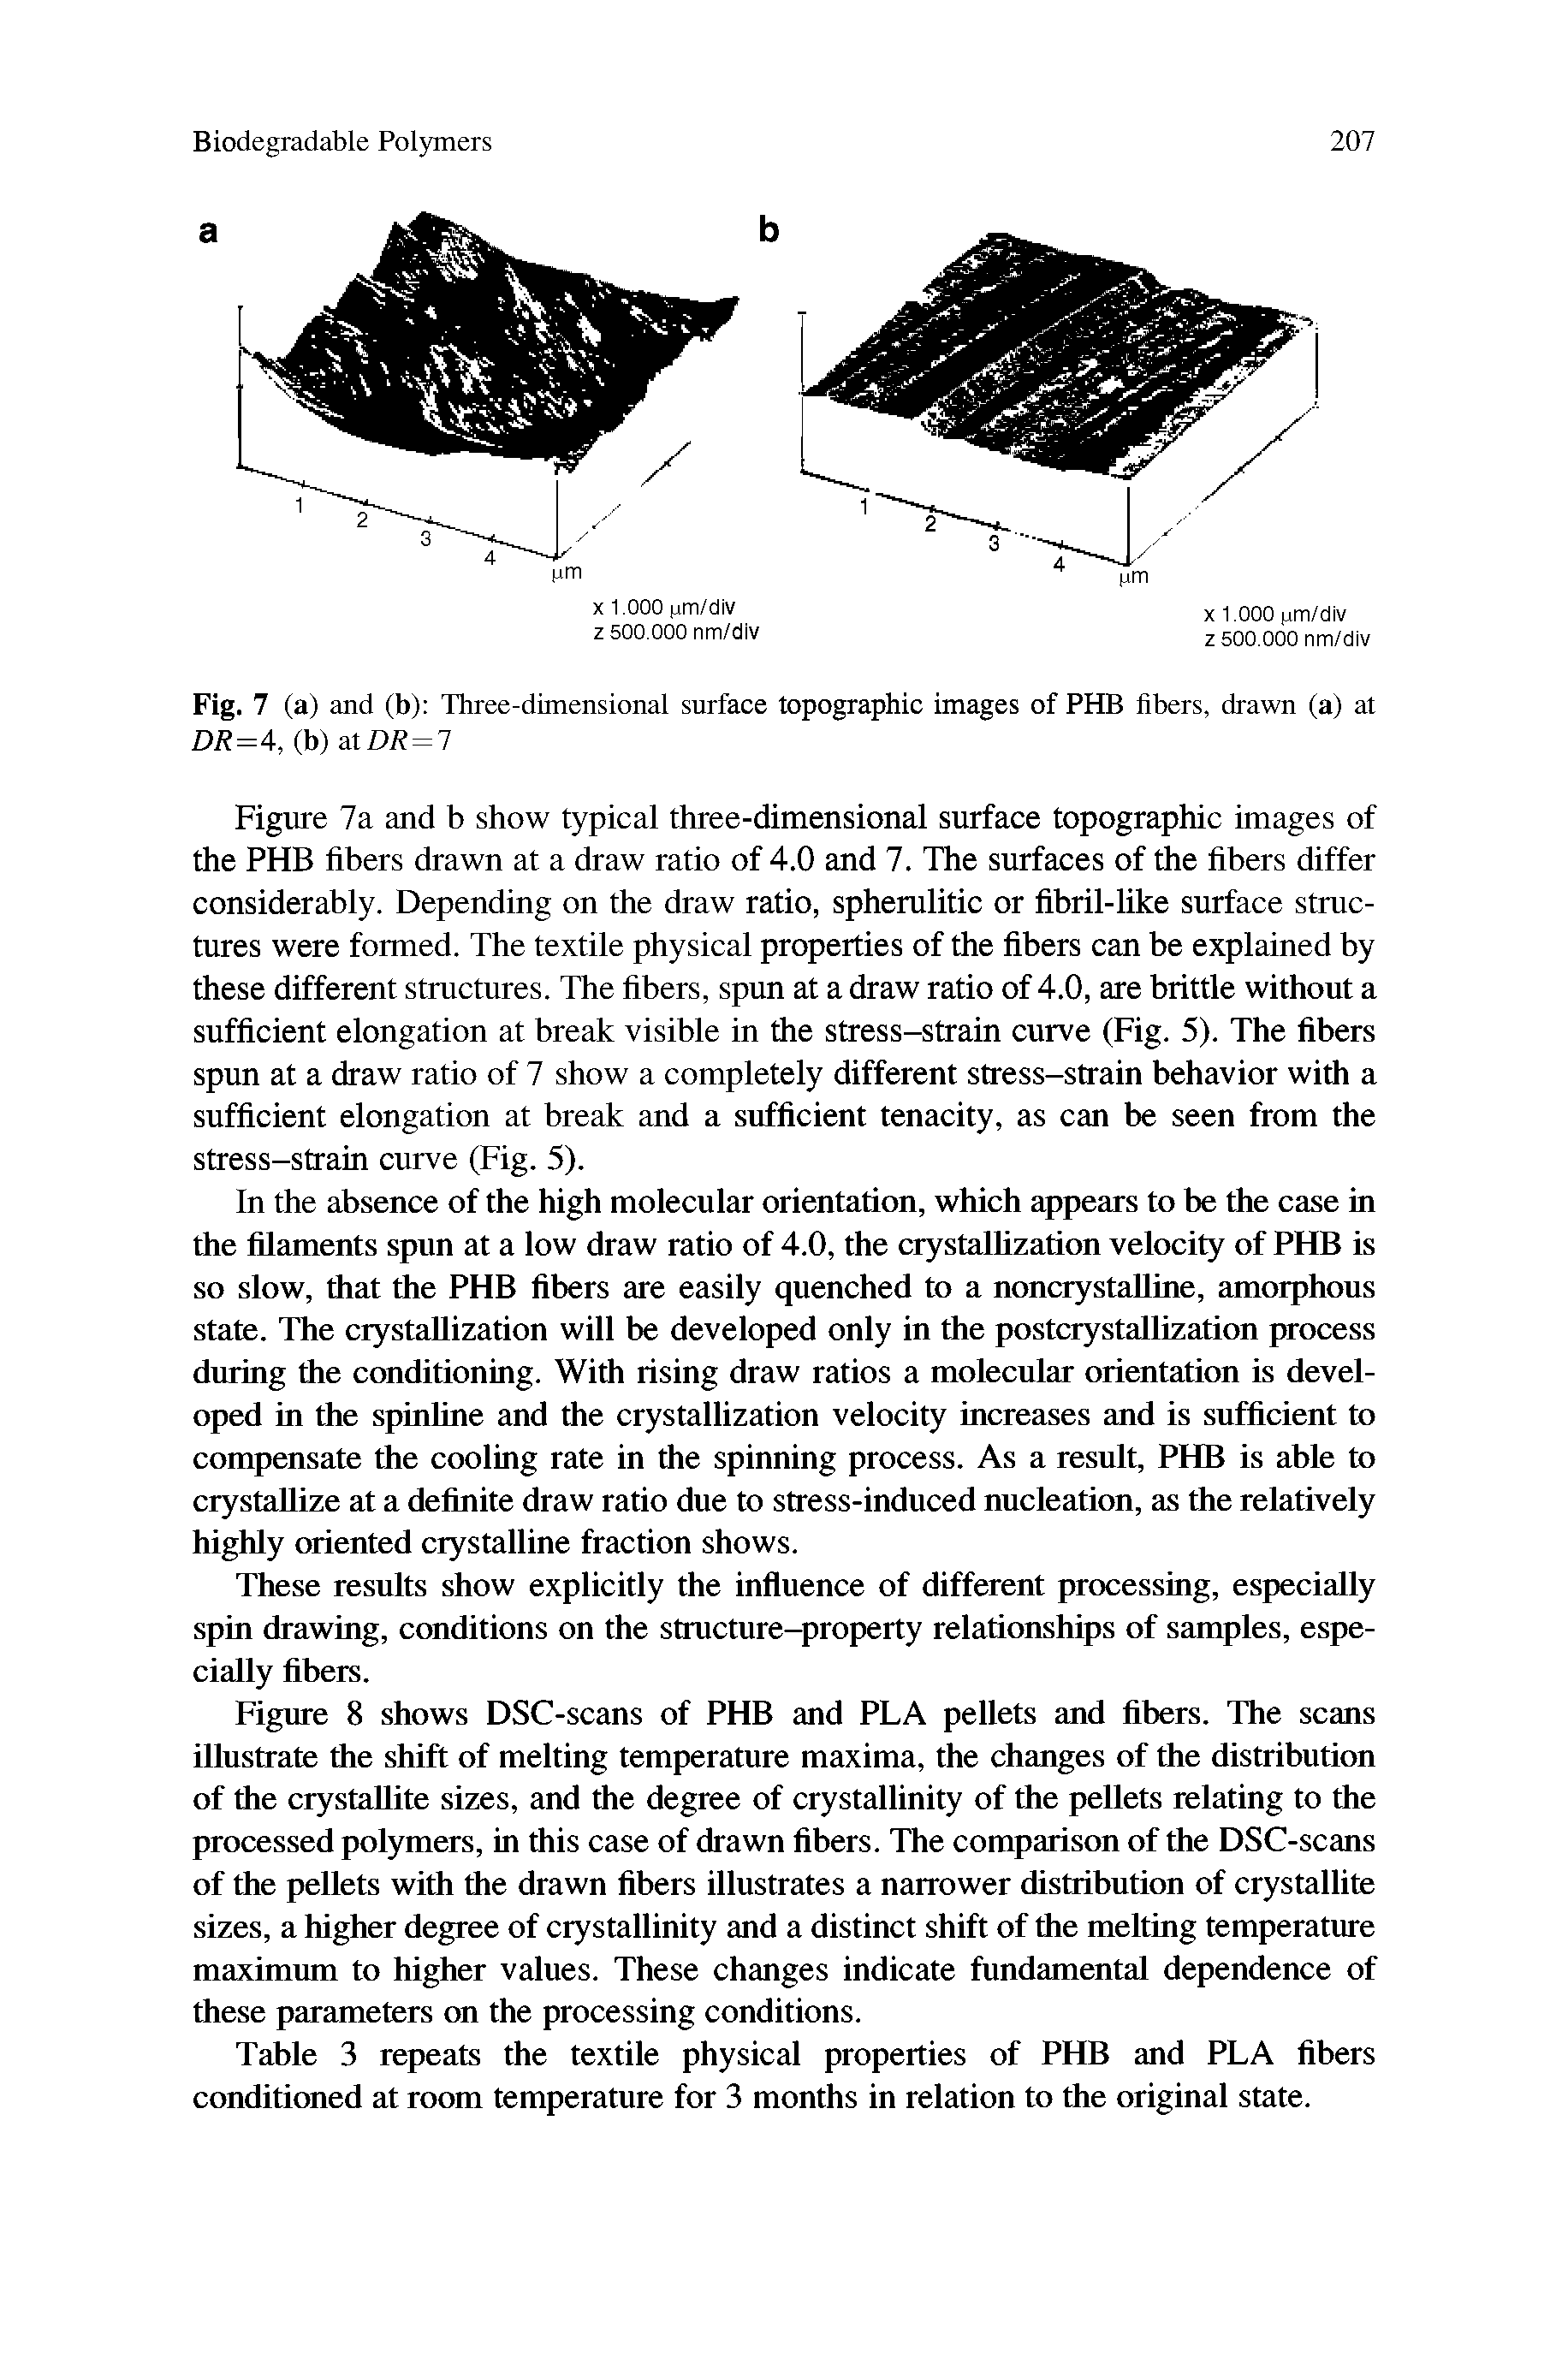 Figure 7a and b show typical three-dimensional surface topographic images of the PHB fibers drawn at a draw ratio of 4.0 and 7. The surfaces of the fibers differ considerably. Depending on the draw ratio, spherulitic or fibril-like surface structures were formed. The textile physical properties of the fibers can be explained by these different structures. The fibers, spun at a draw ratio of 4.0, are brittle without a sufficient elongation at break visible in the stress-strain curve (Fig. 5). The fibers spun at a draw ratio of 7 show a completely different stress-strain behavior with a sufficient elongation at break and a sufficient tenacity, as can be seen from the stress-strain curve (Fig. 5).